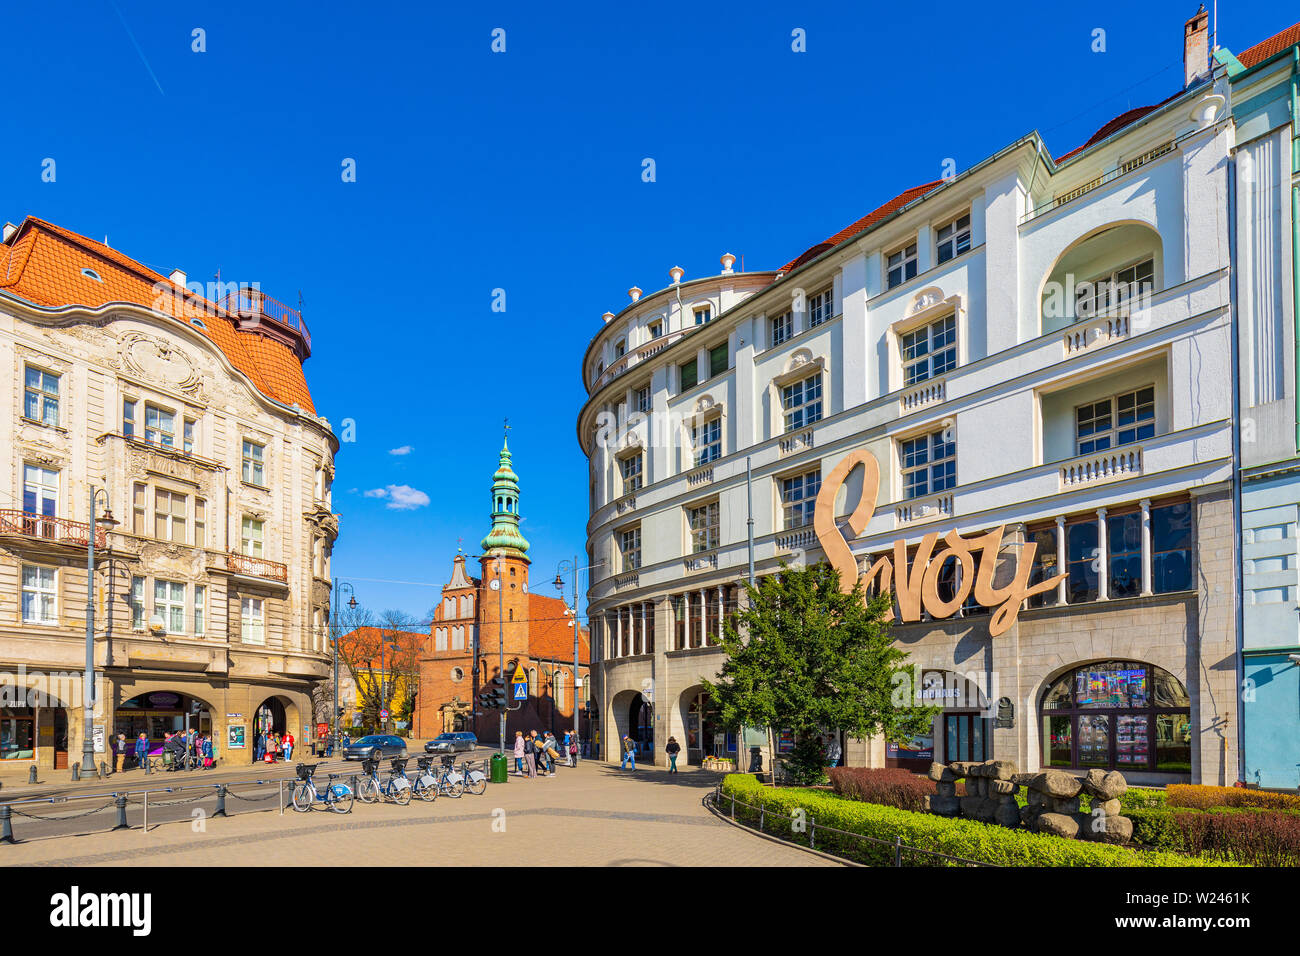 Bydgoszcz, Kujavian-Pomeranian / Poland - 2019/04/01: Panoramic view of the historic city center with the Poor Clares church in background Stock Photo